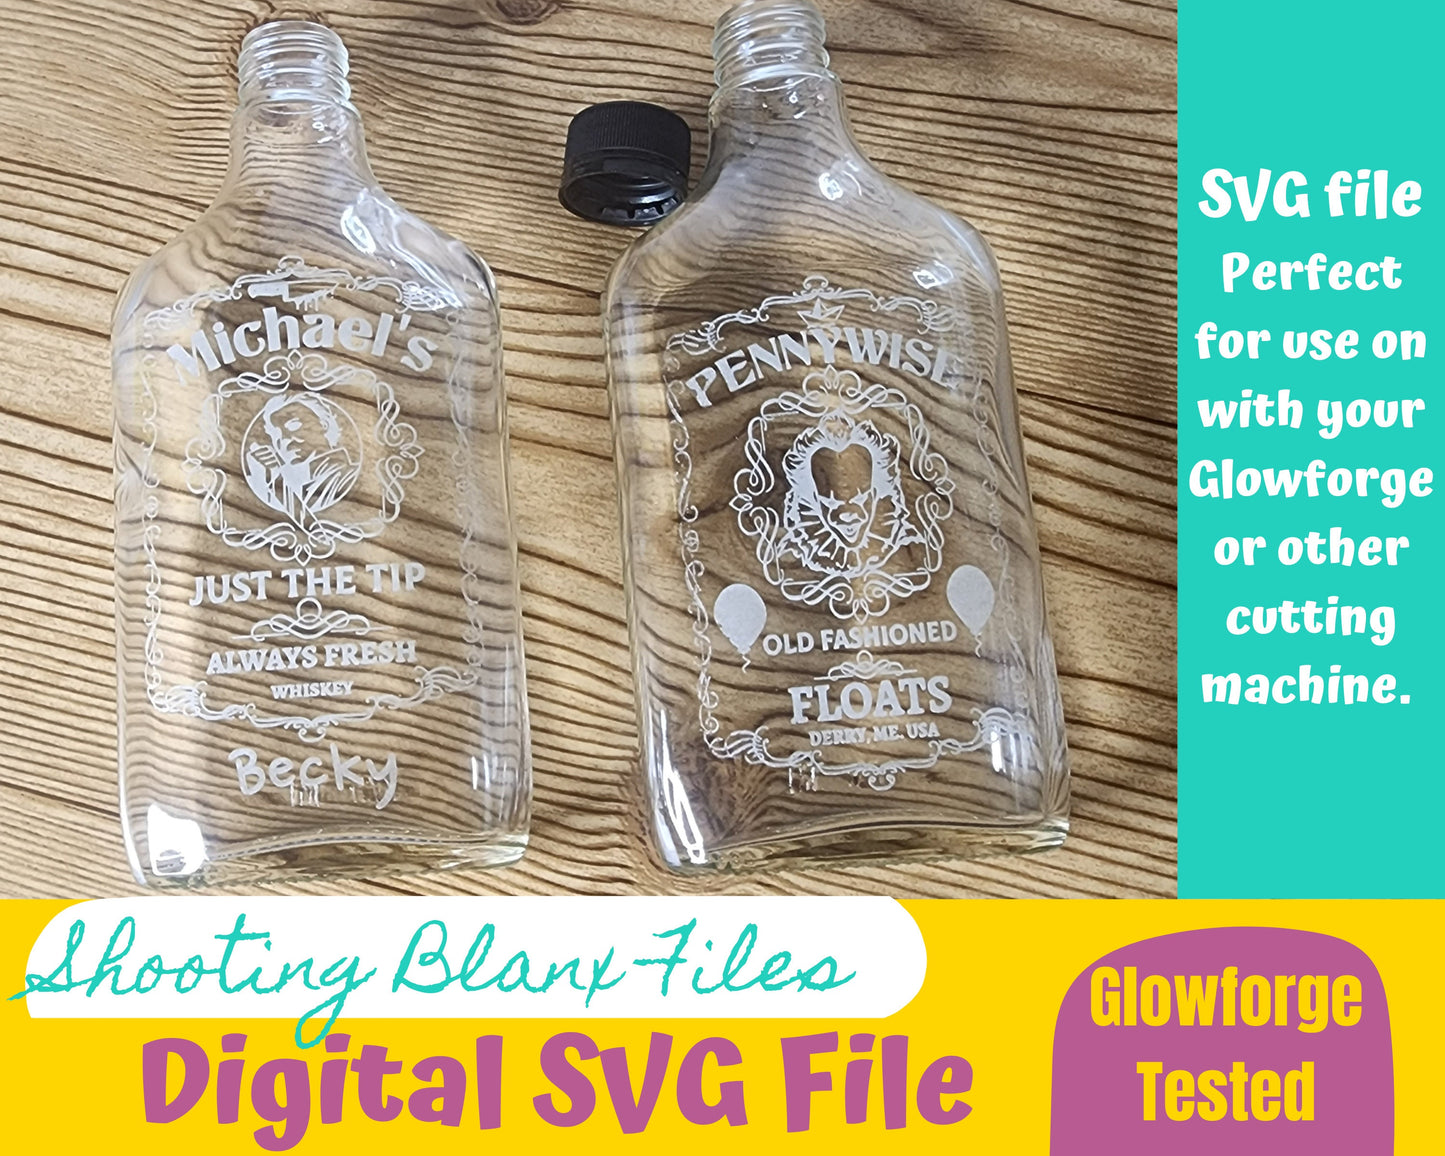 Horror Whiskey Flask Labels  SVG Files | Halloween whisky | Glowforge Cut File | Digital File, Hannibal Lecter, Silence of the Lambs